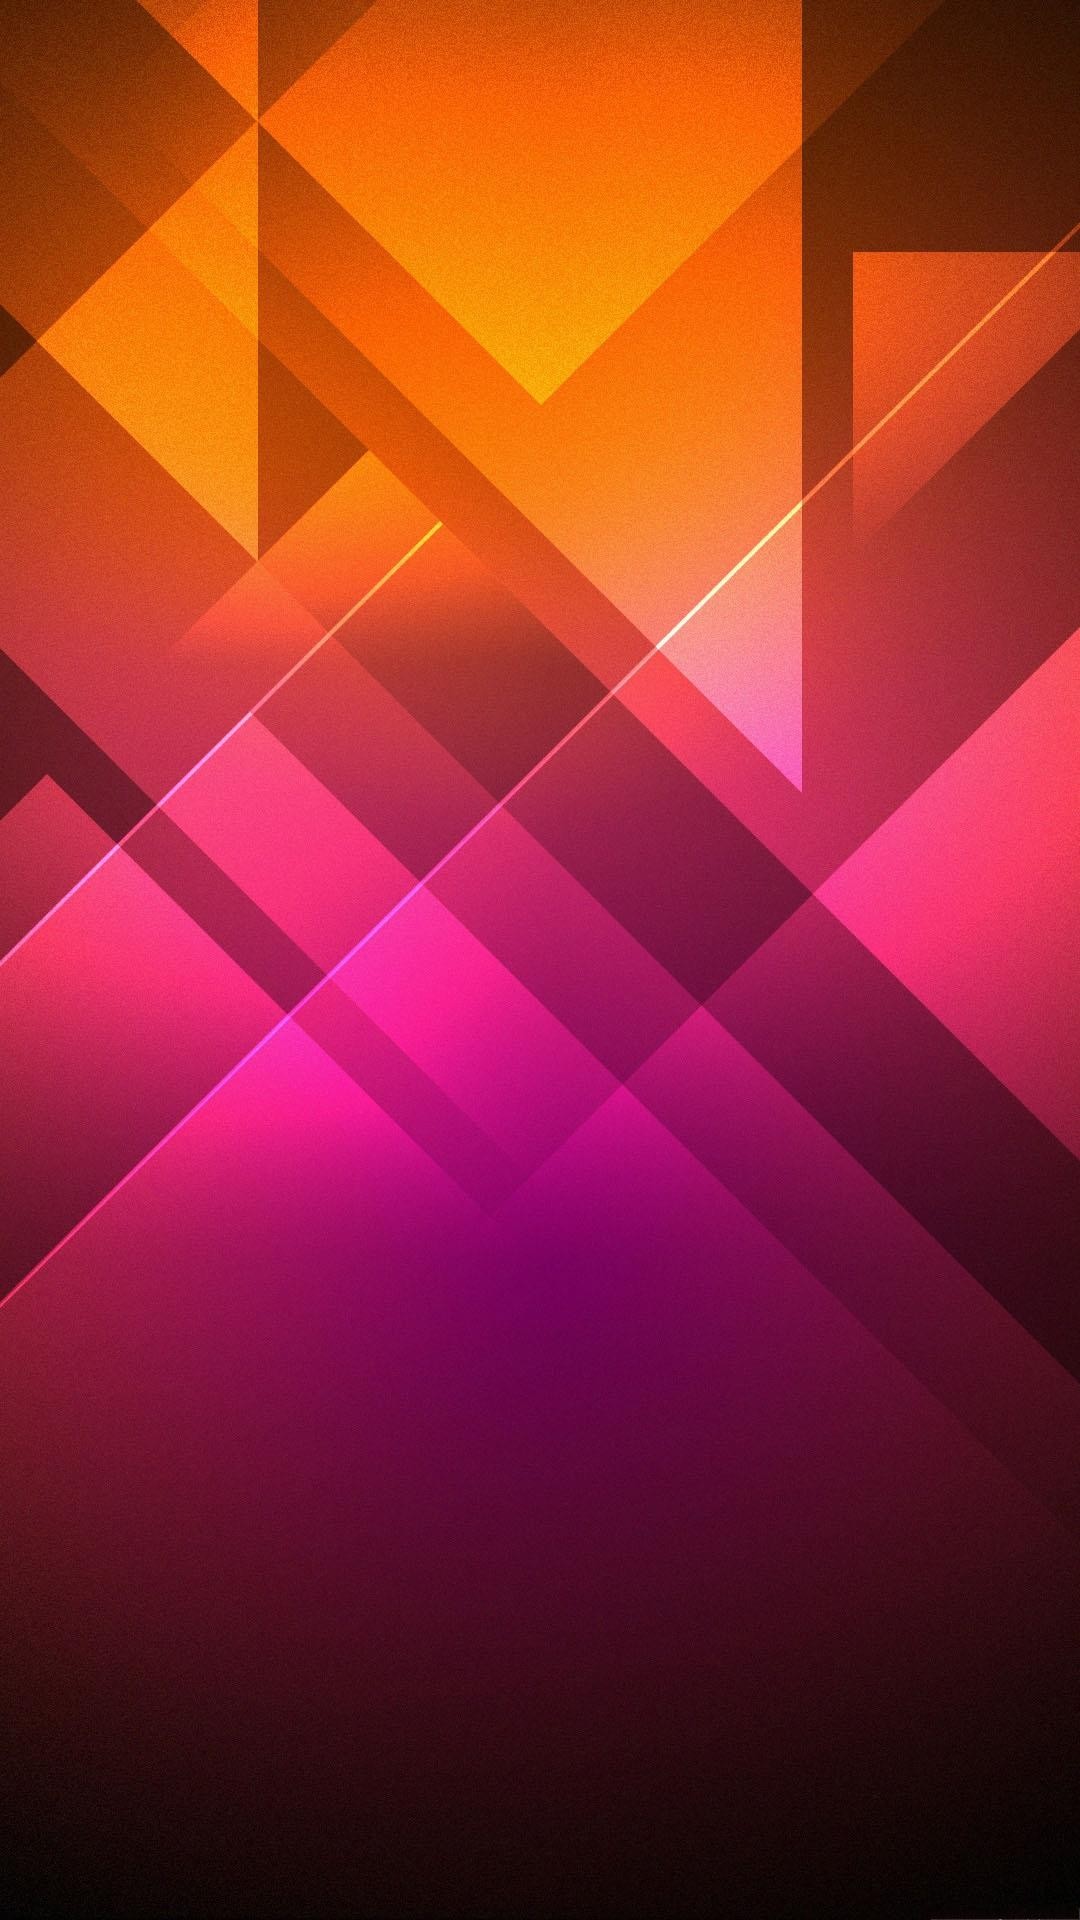 1080x1920 ... wallpaper phone android wallpapers home ...